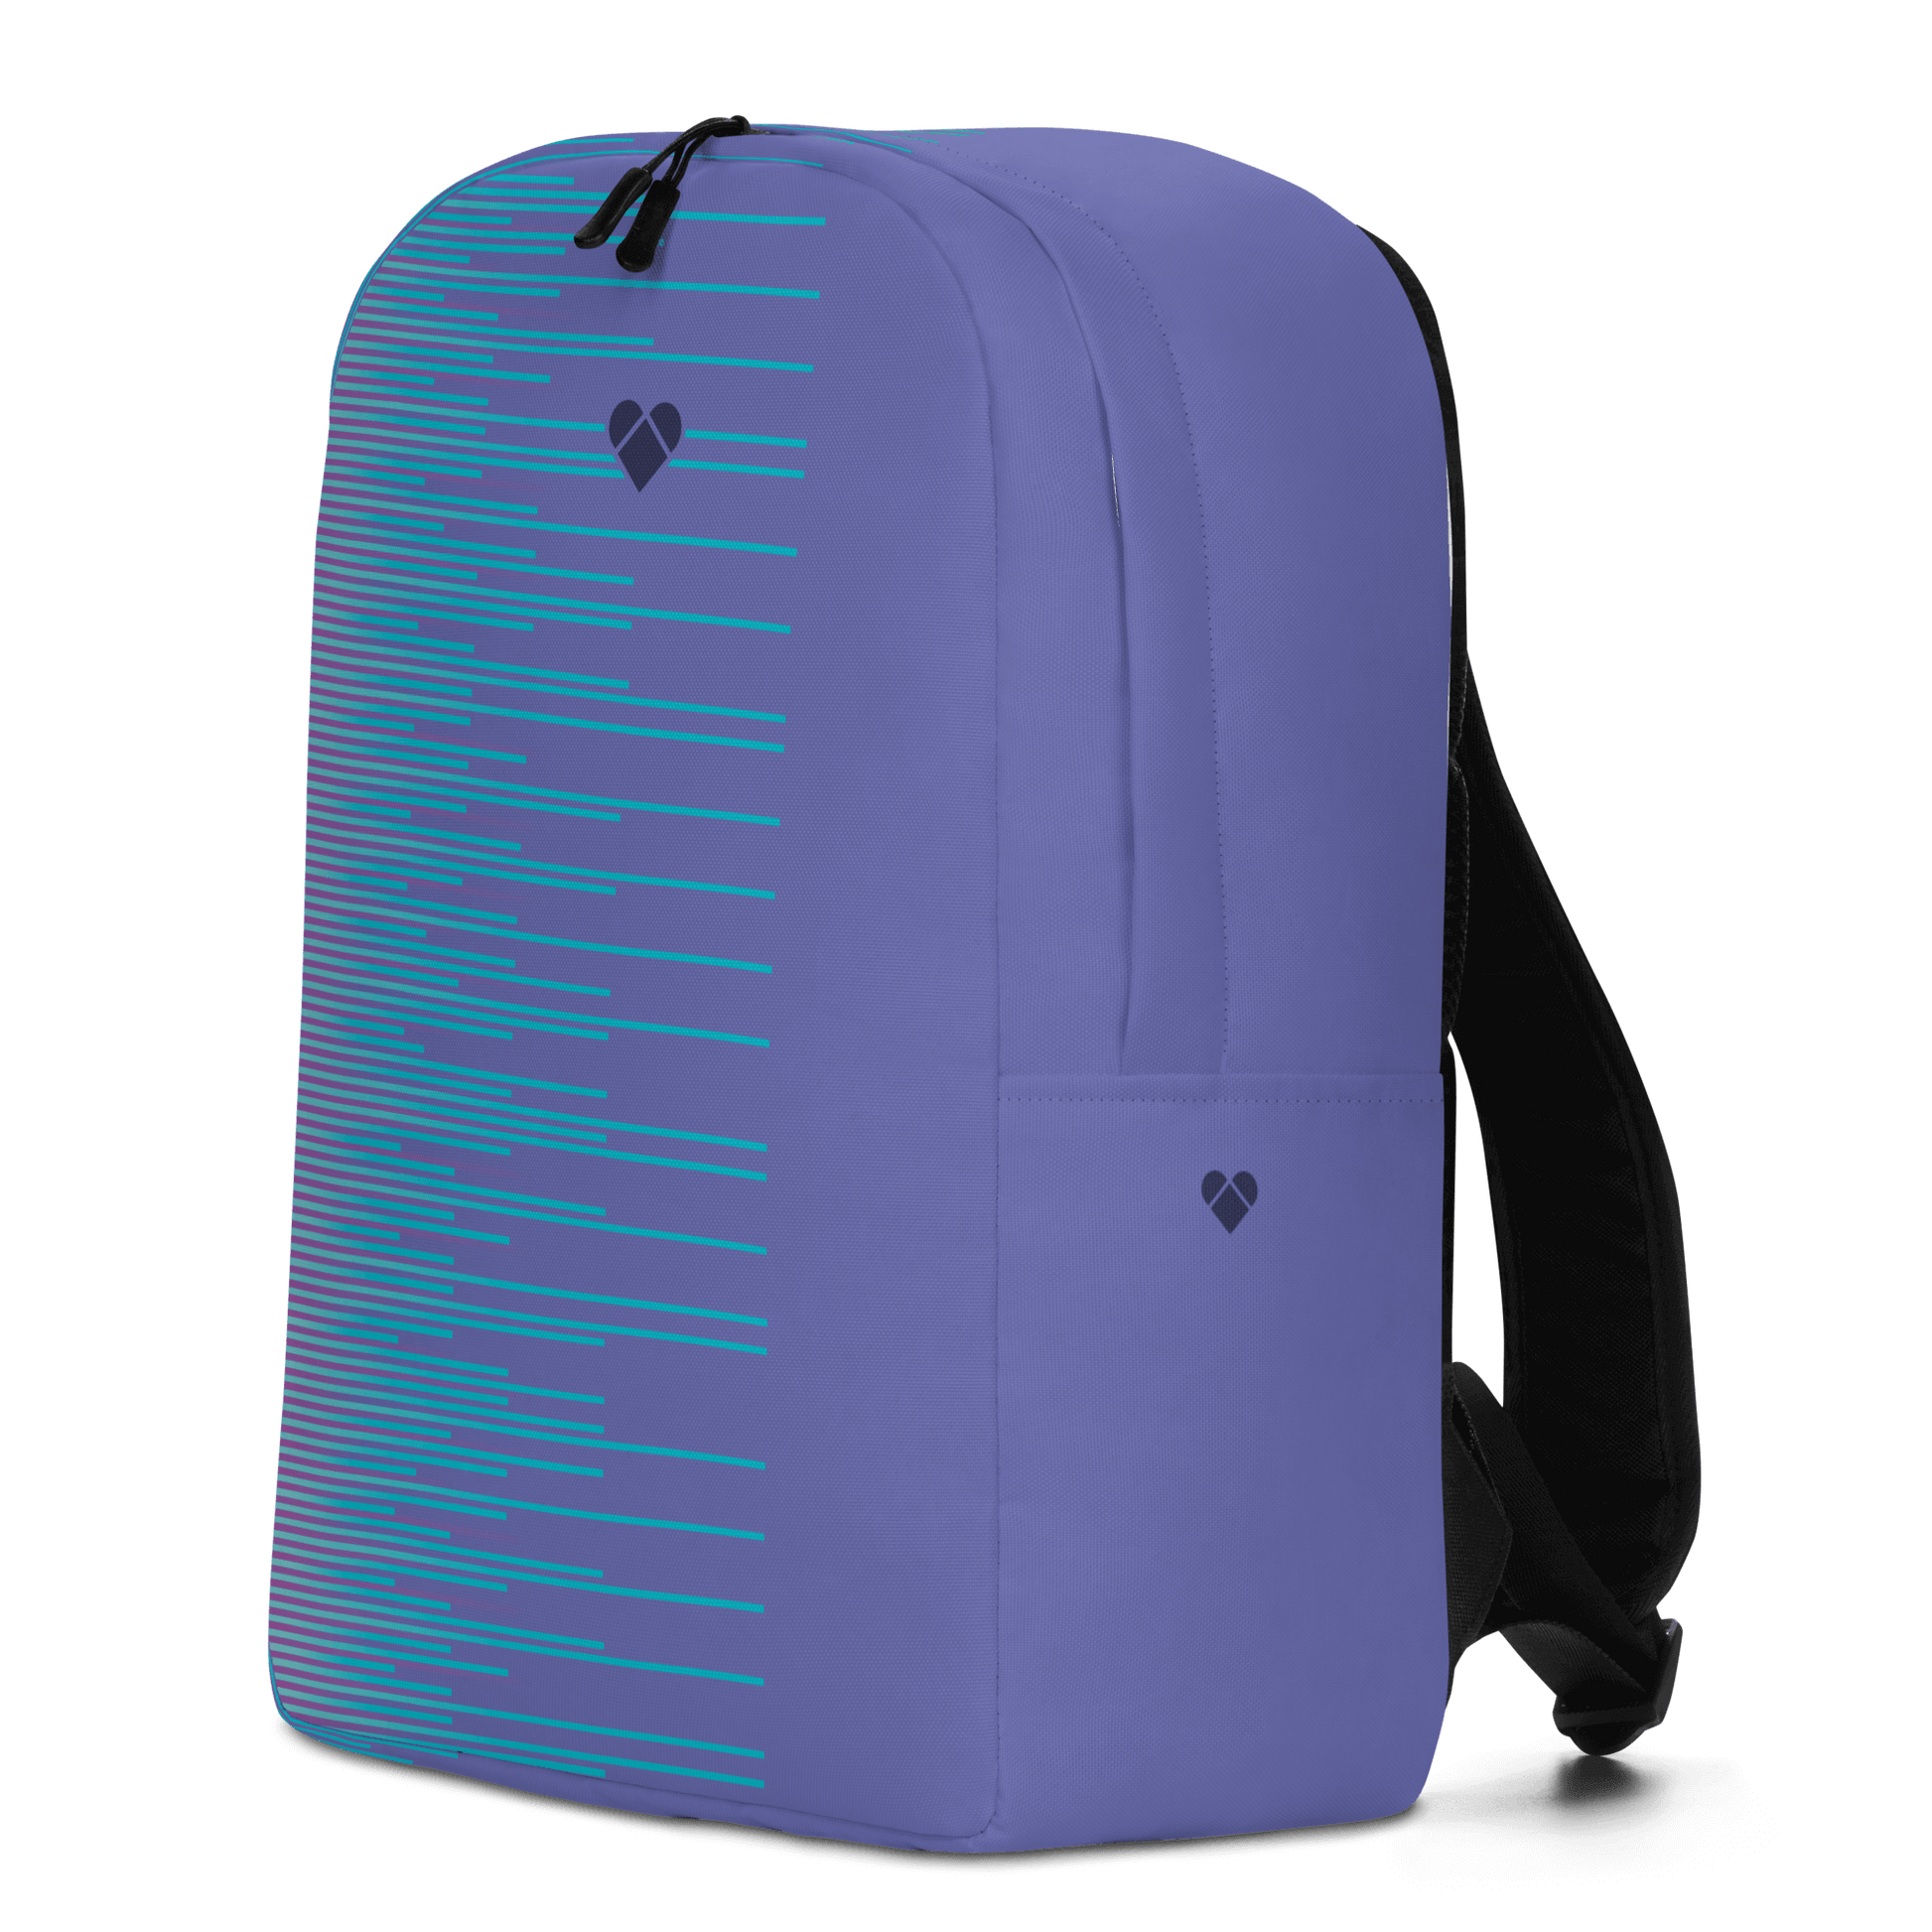 Designer Periwinkle Backpack with Turquoise Stripes and Heart Logo